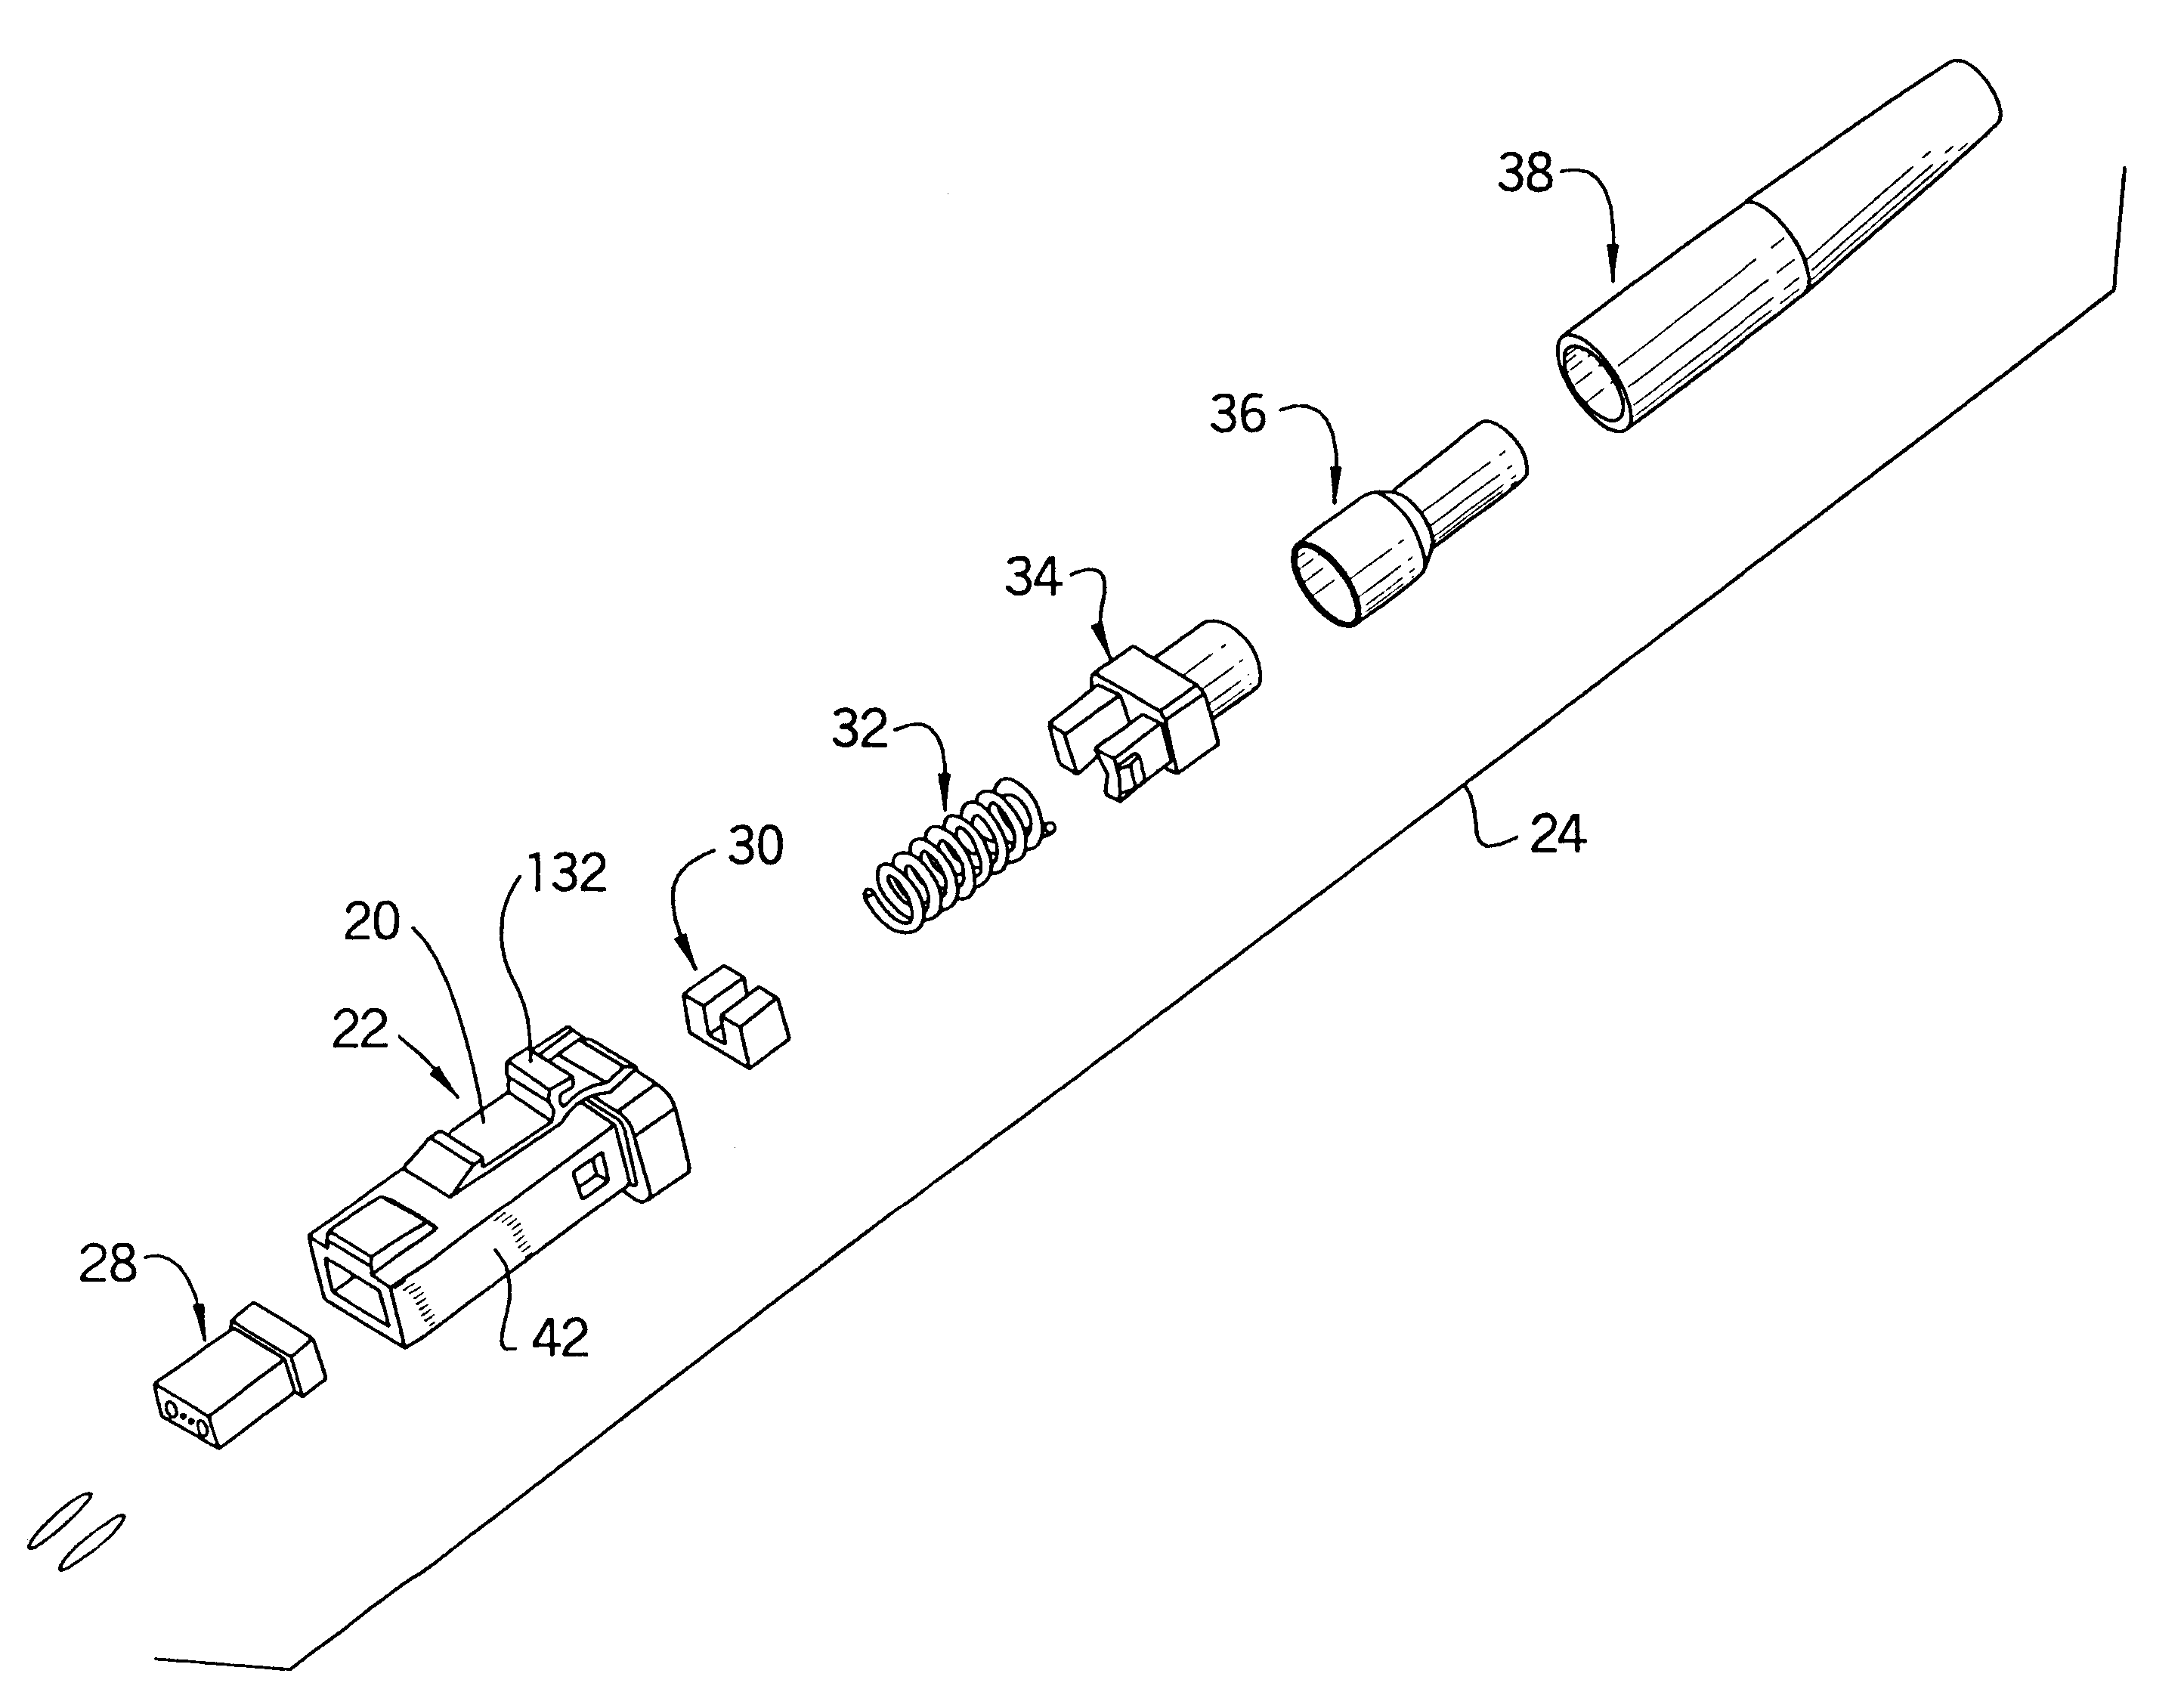 Plug housing with attached cantilevered latch for a fiber optic connector